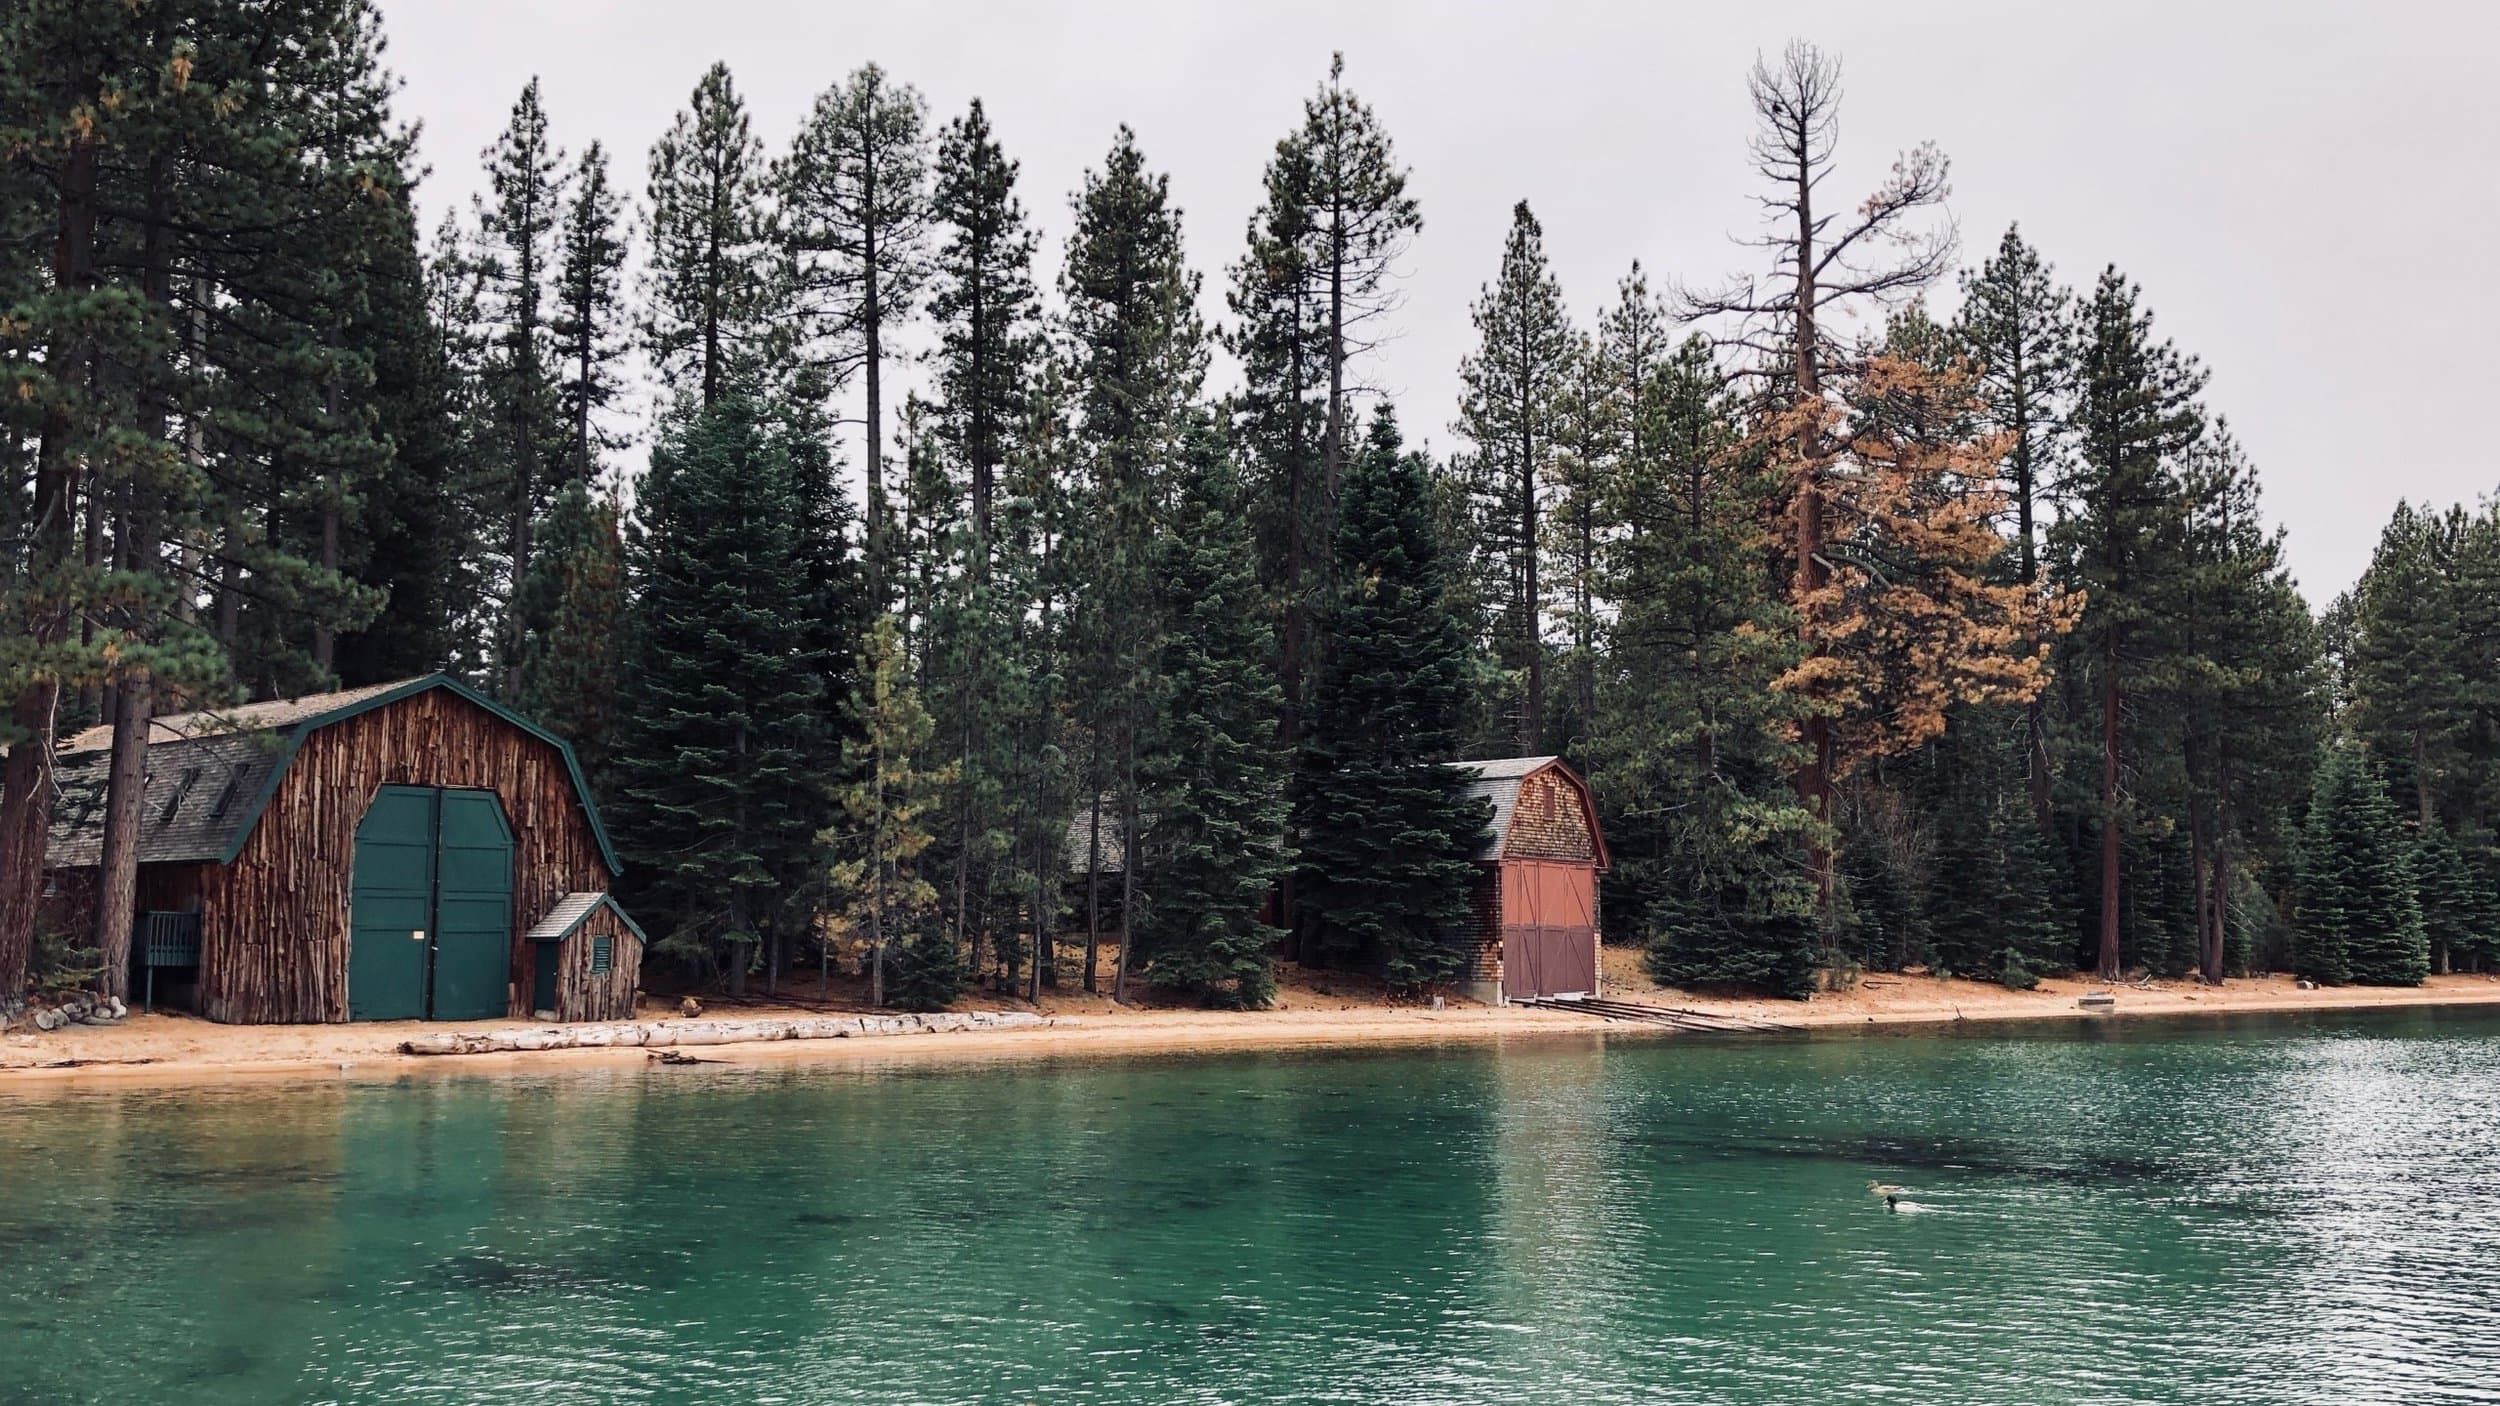 Historic buildings on edge of Lake at Tallac Historic Site